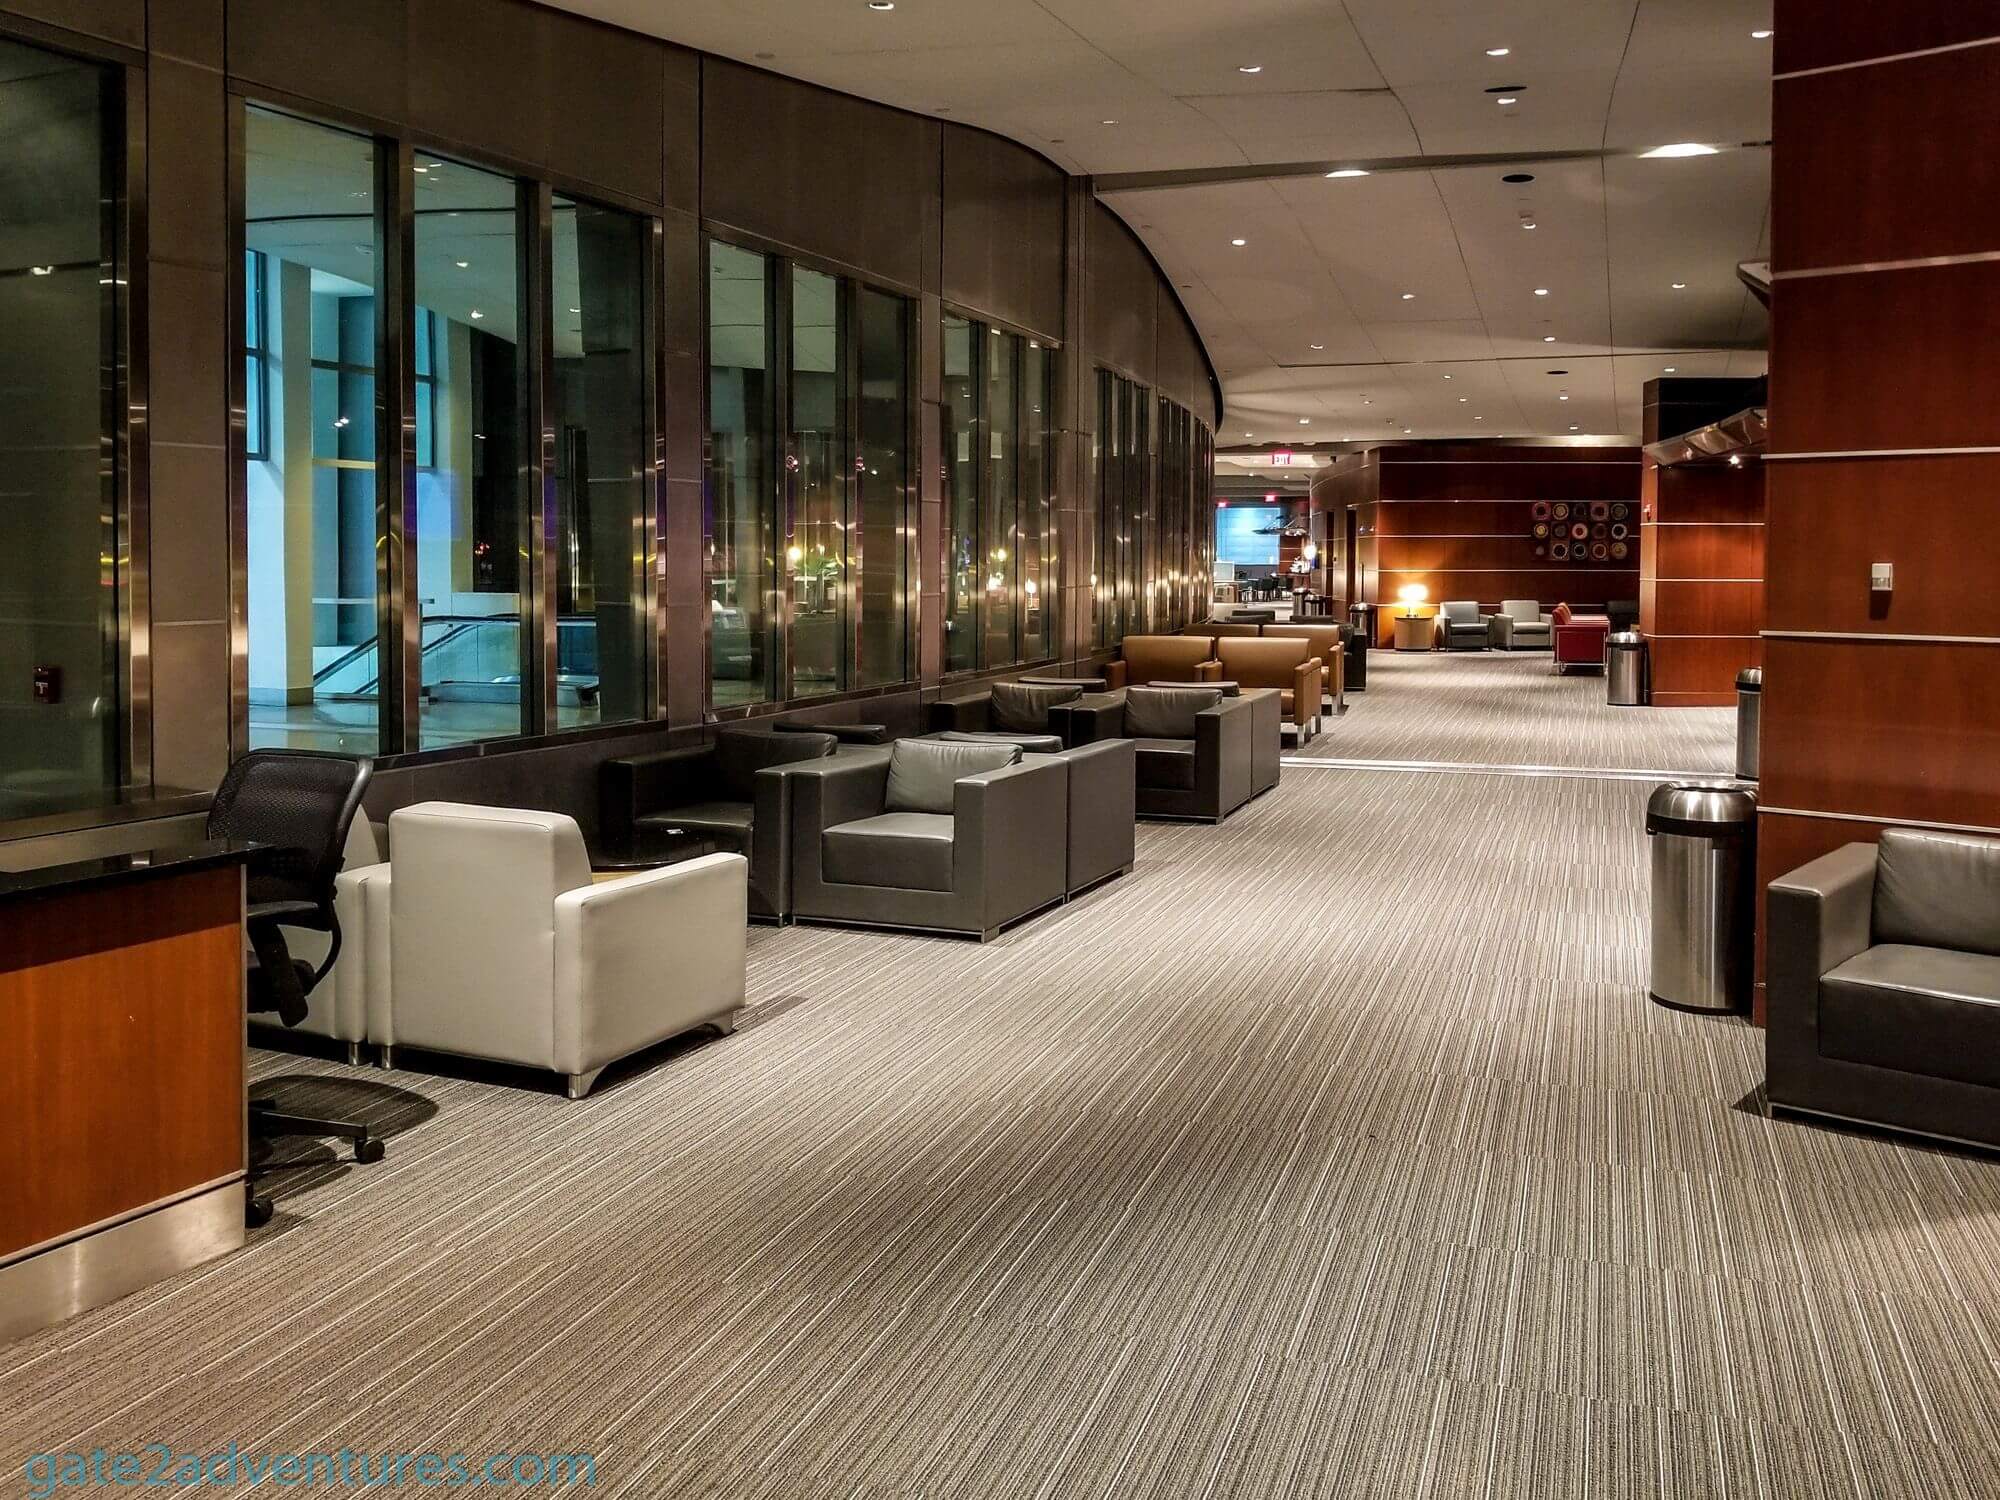 American Airlines Admirals Club Philadelphia - A Gates West